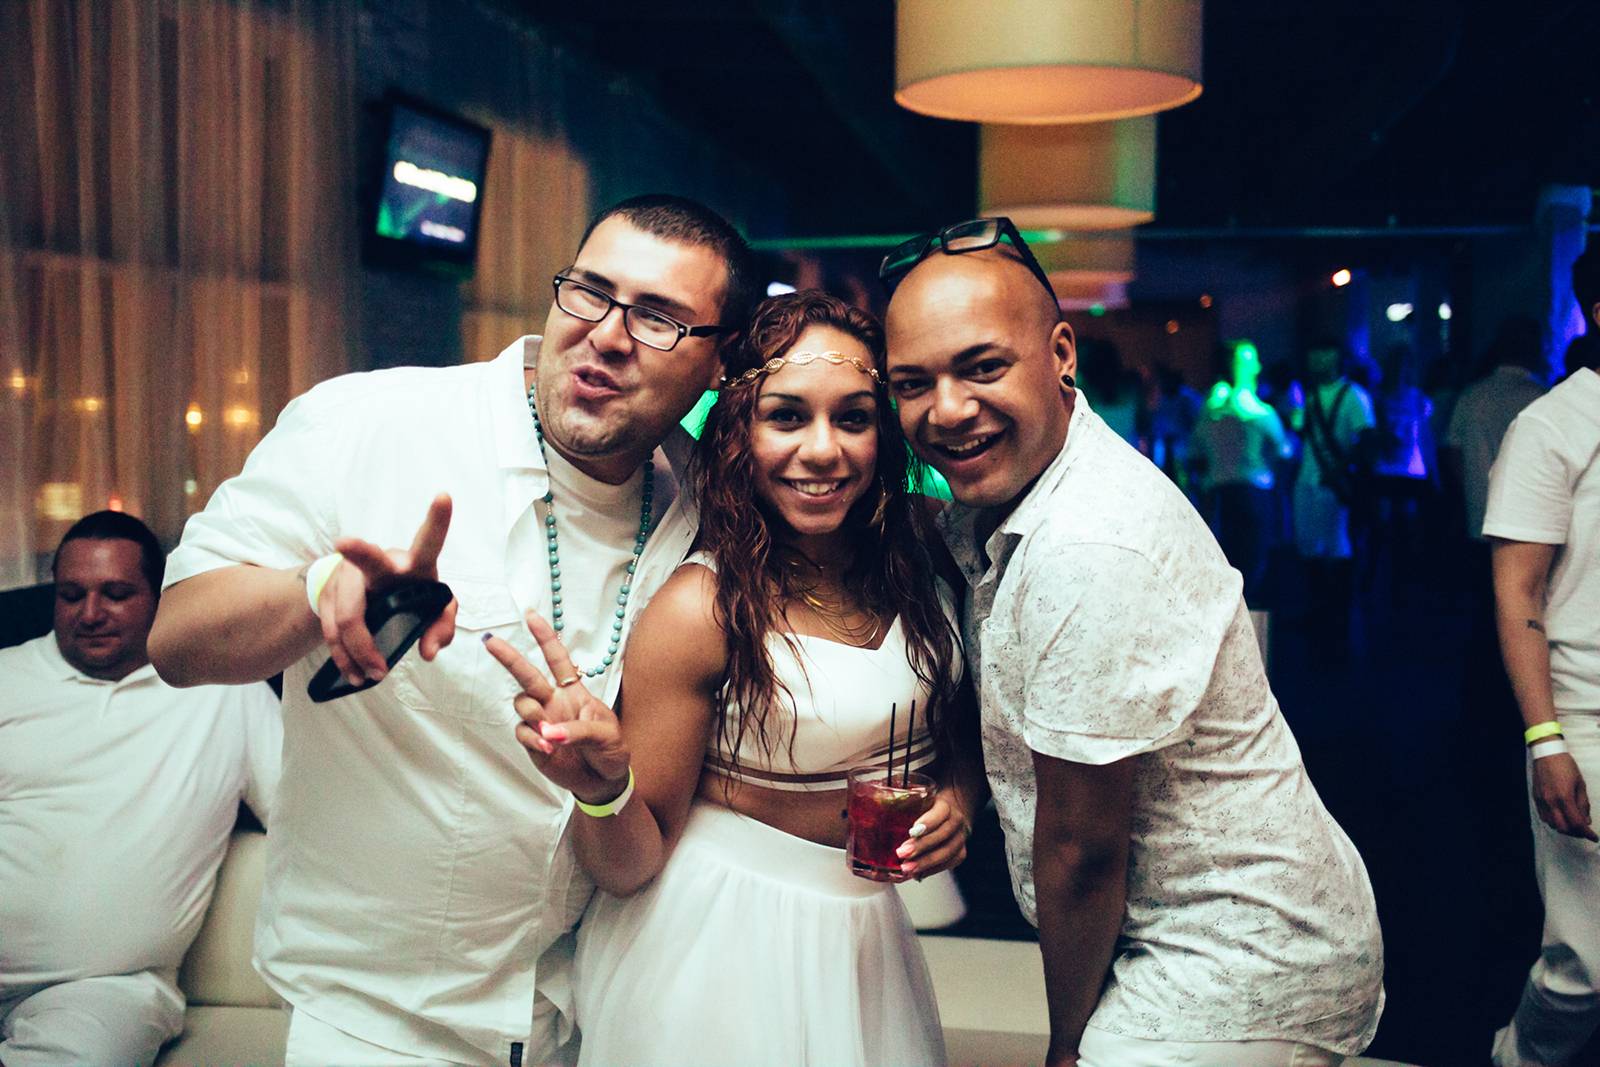 White Party at Eve Nightclub in Grand Rapids, Michigan